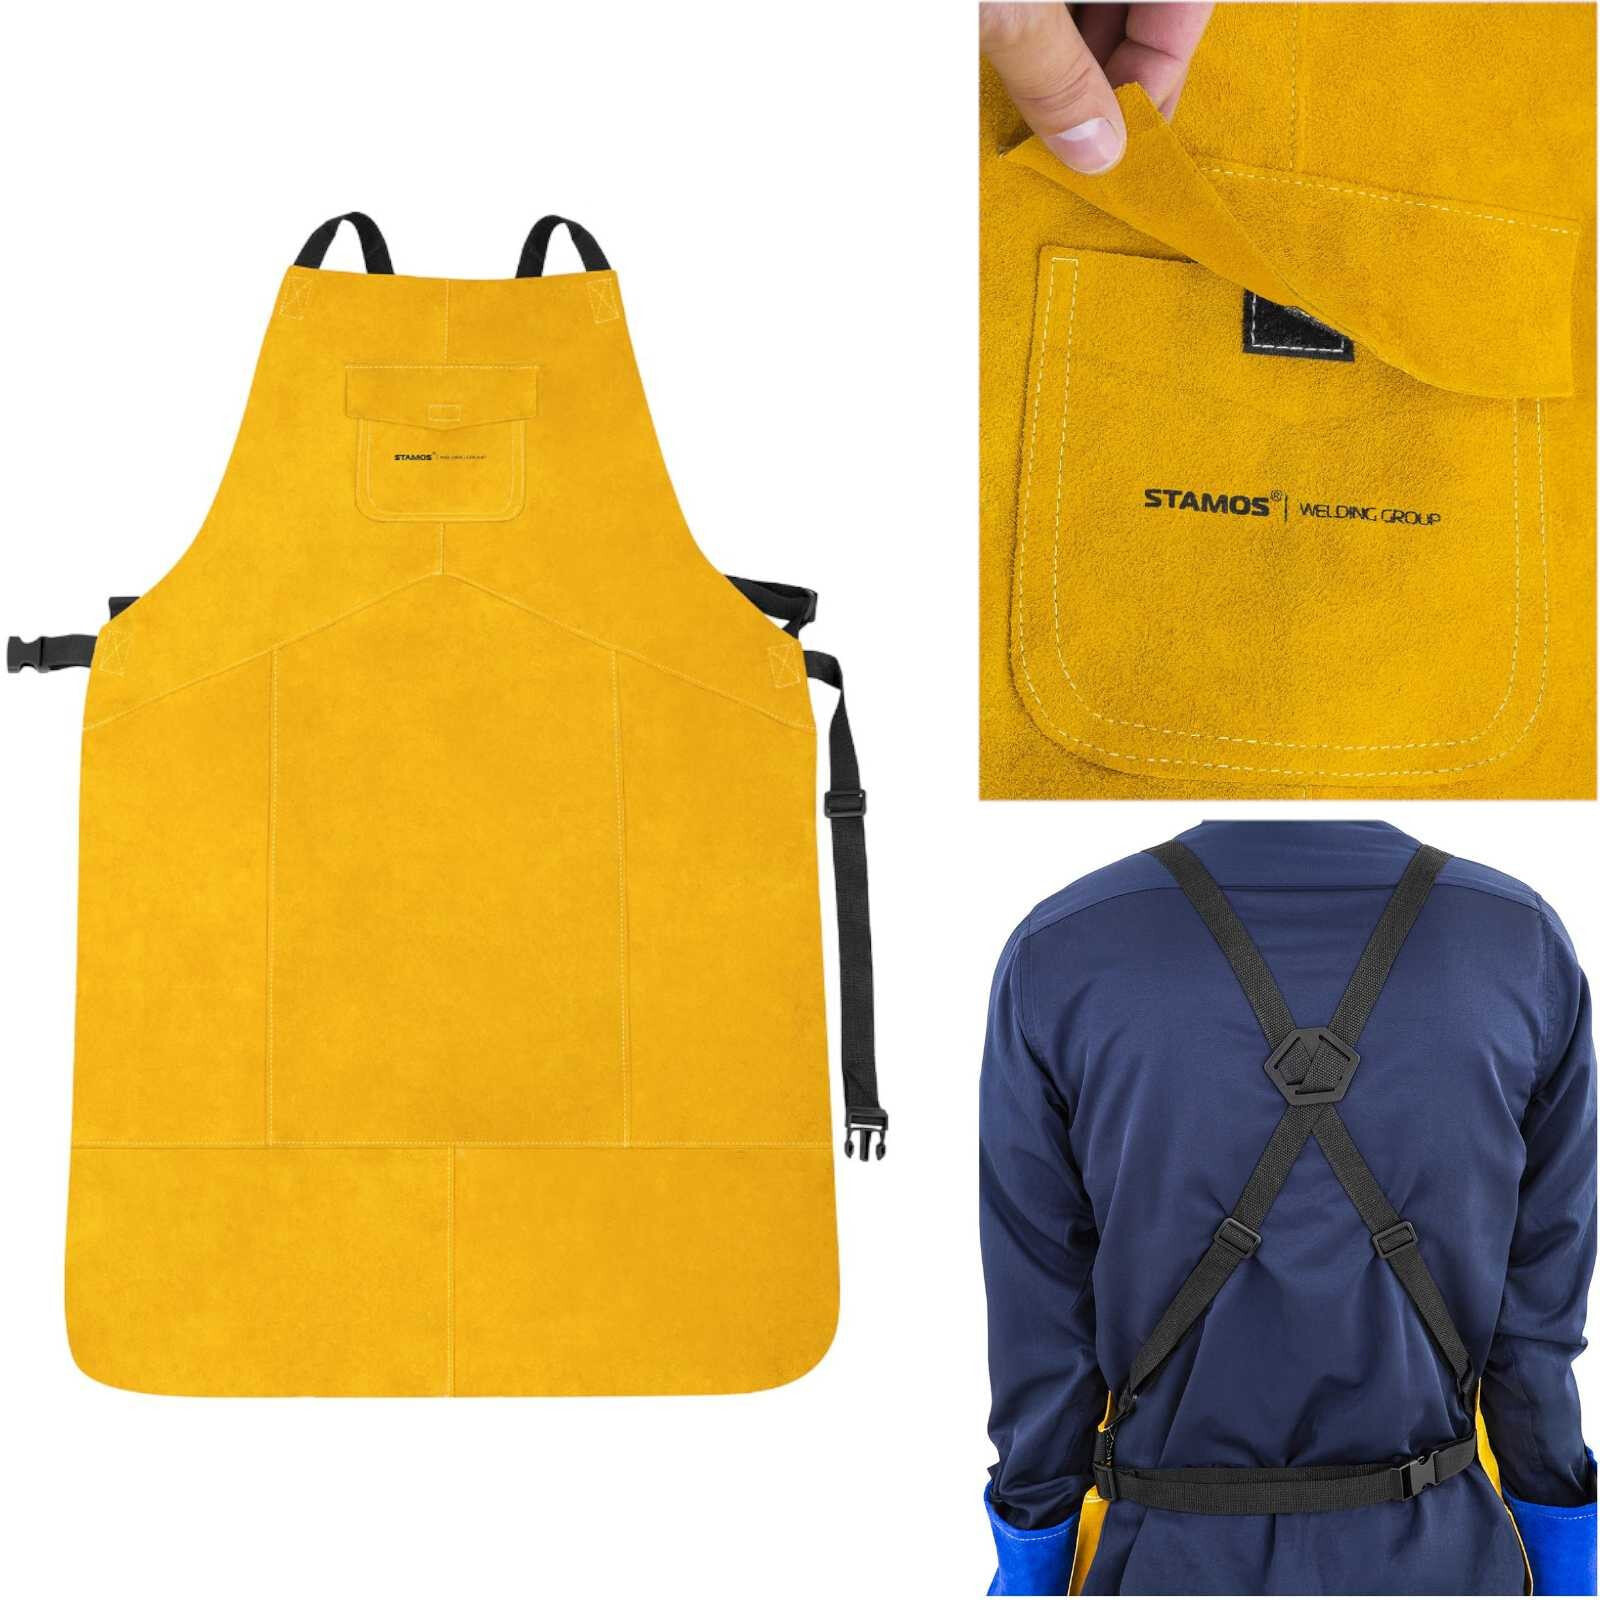 Heavy duty welder's protective leather apron size L